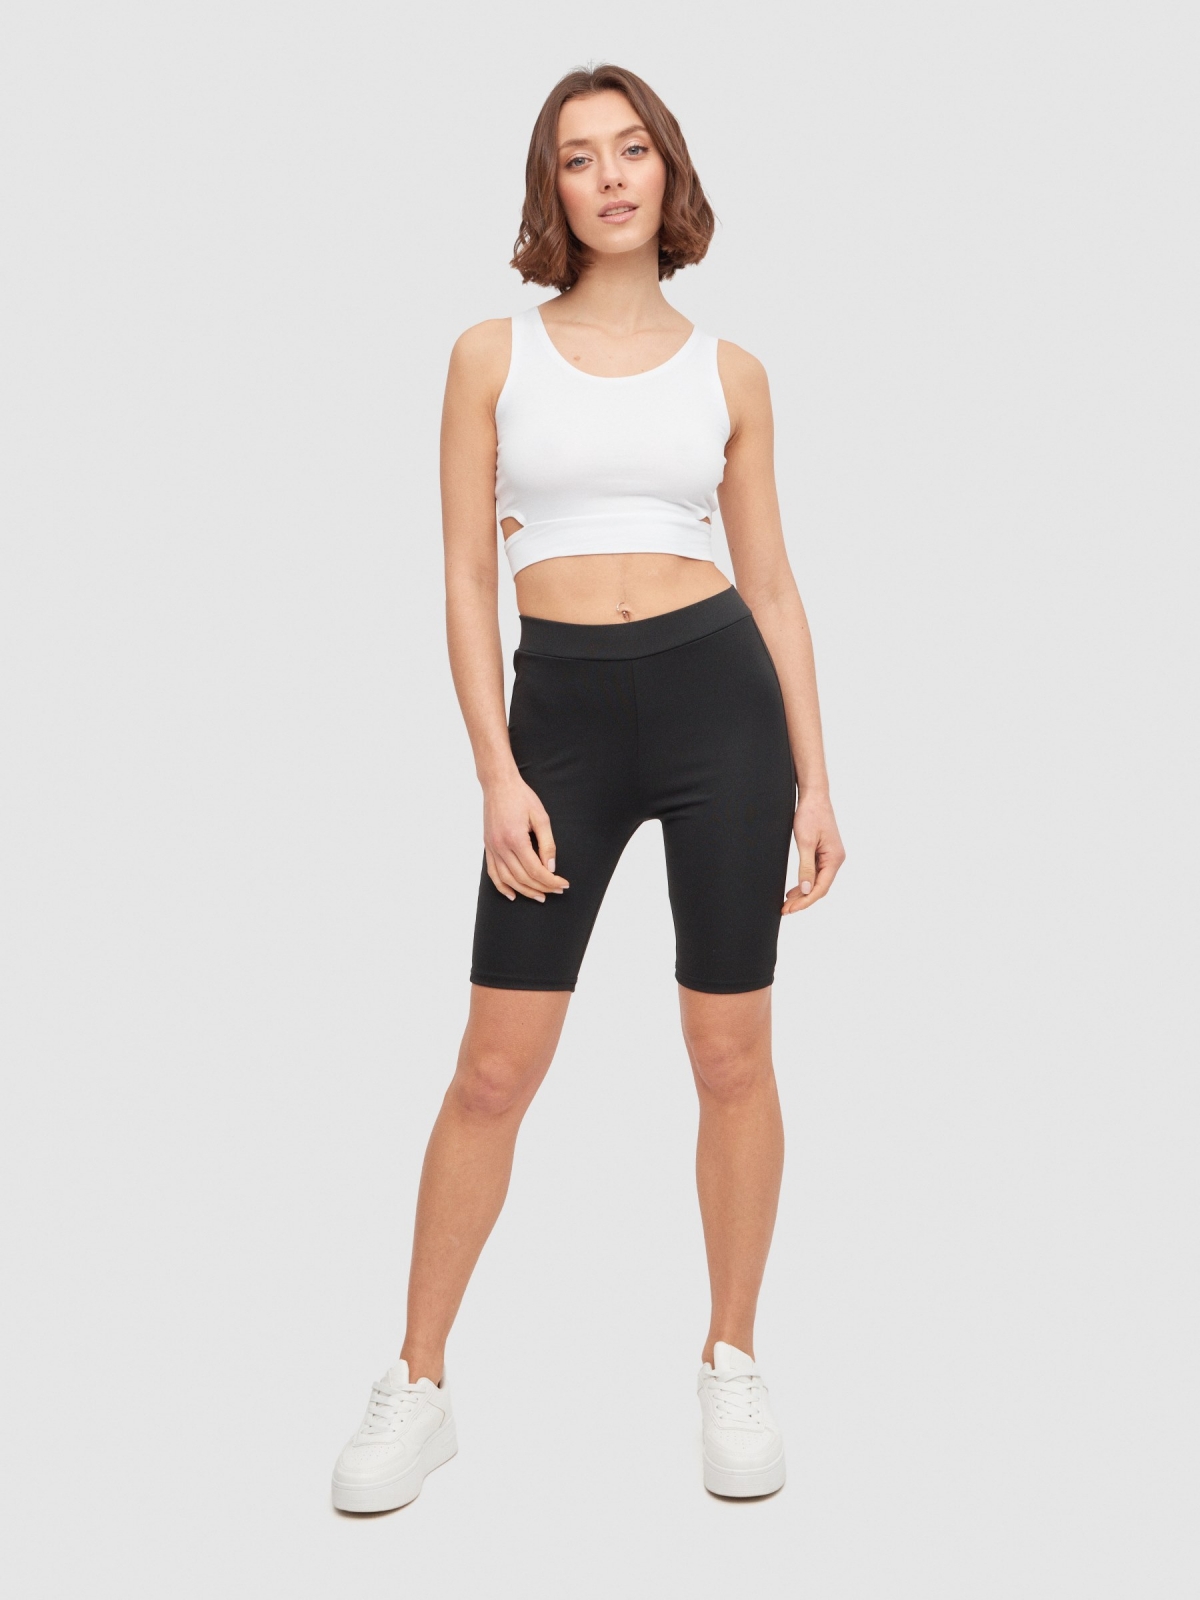 High-waisted cycling leggings black middle back view